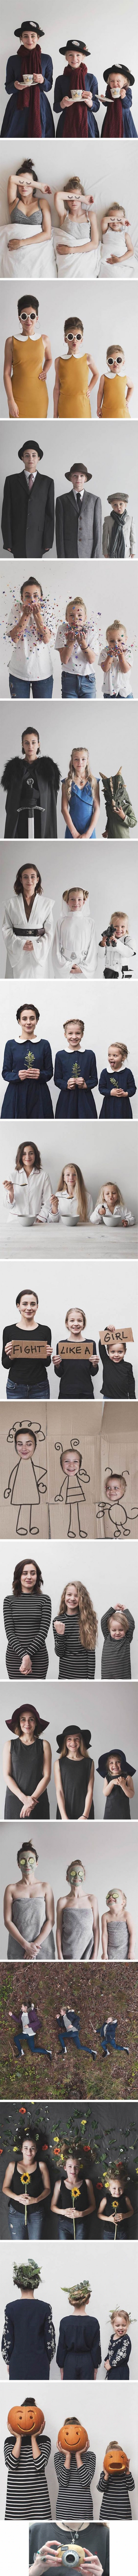 Mother Takes Adorable Photos With Her Two Daughters In Matching Clothing